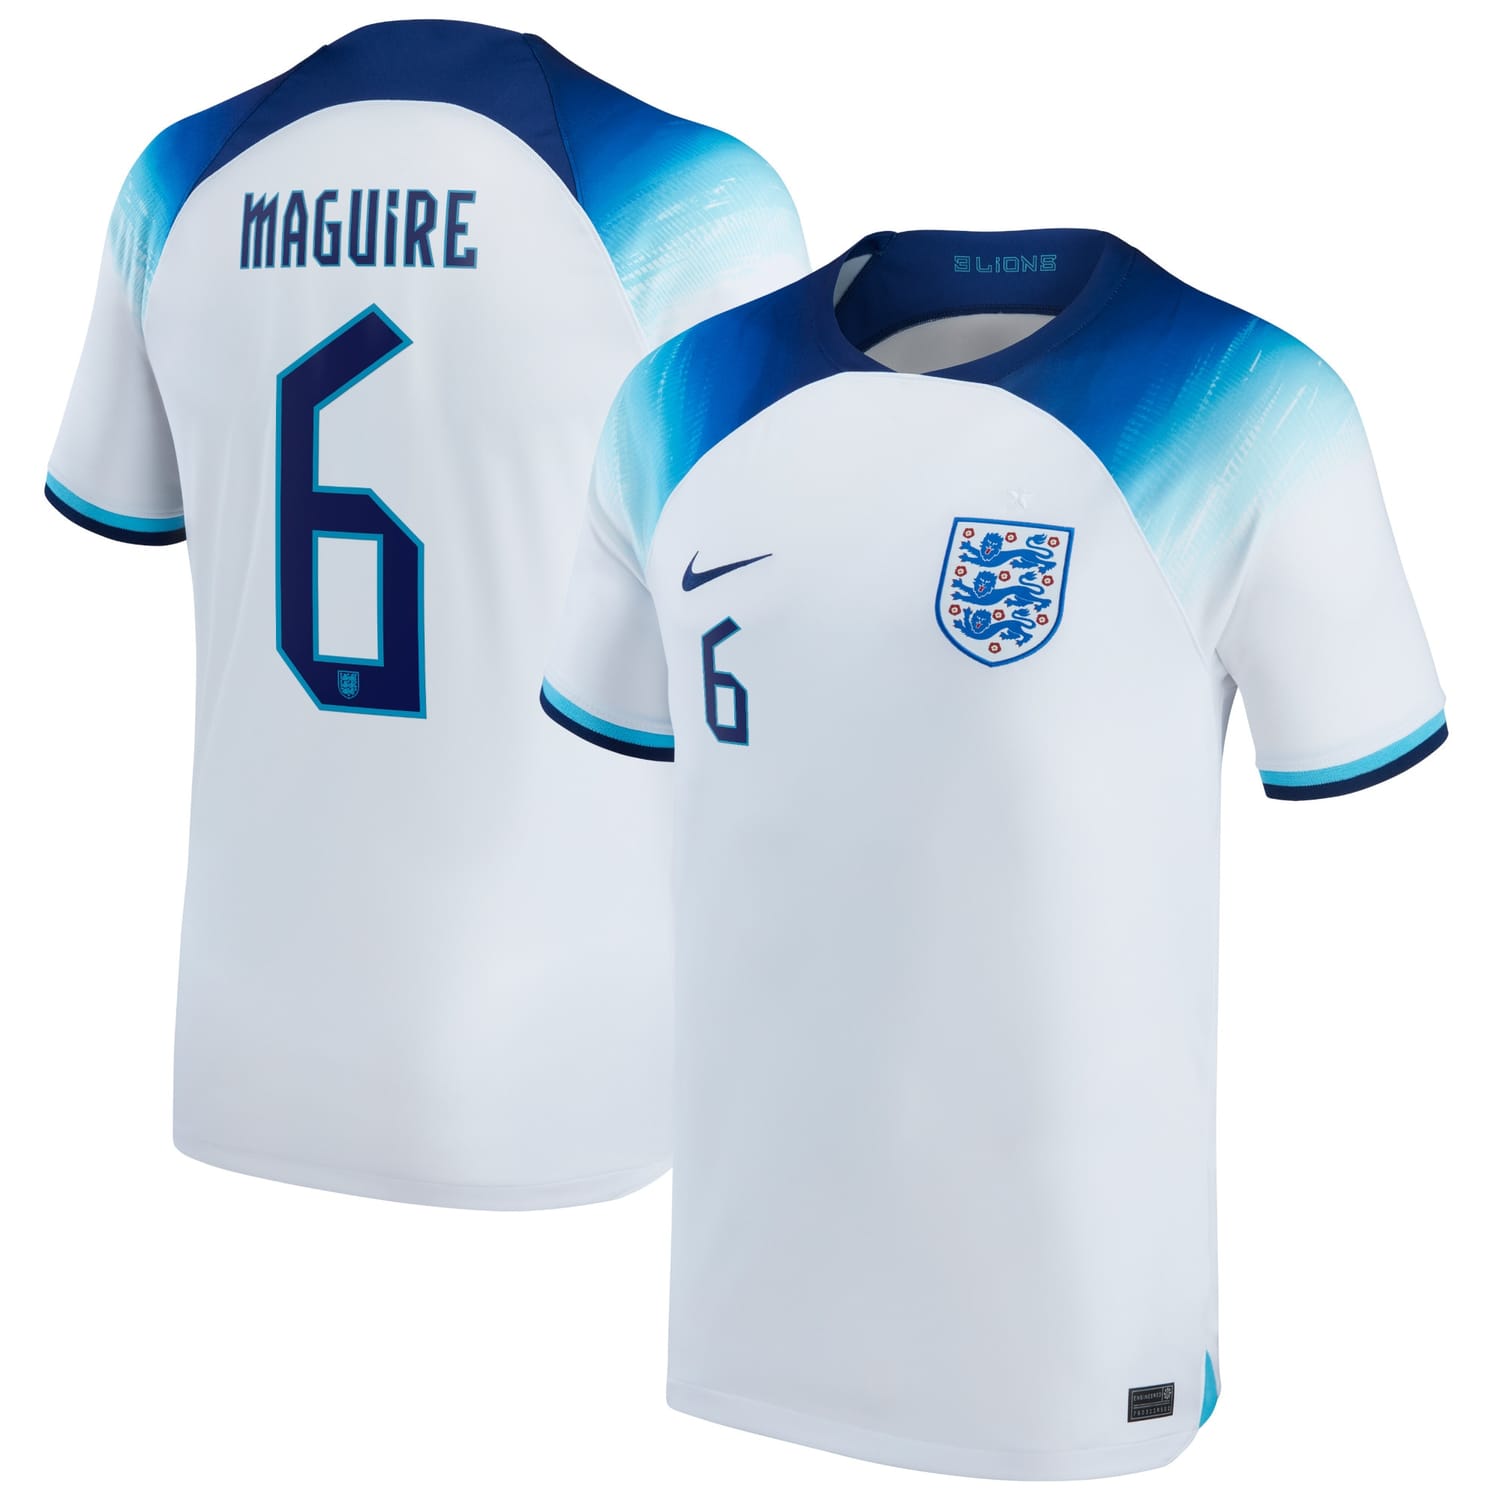 England National Team Home Jersey Shirt 2022 player Harry Maguire 6 printing for Men